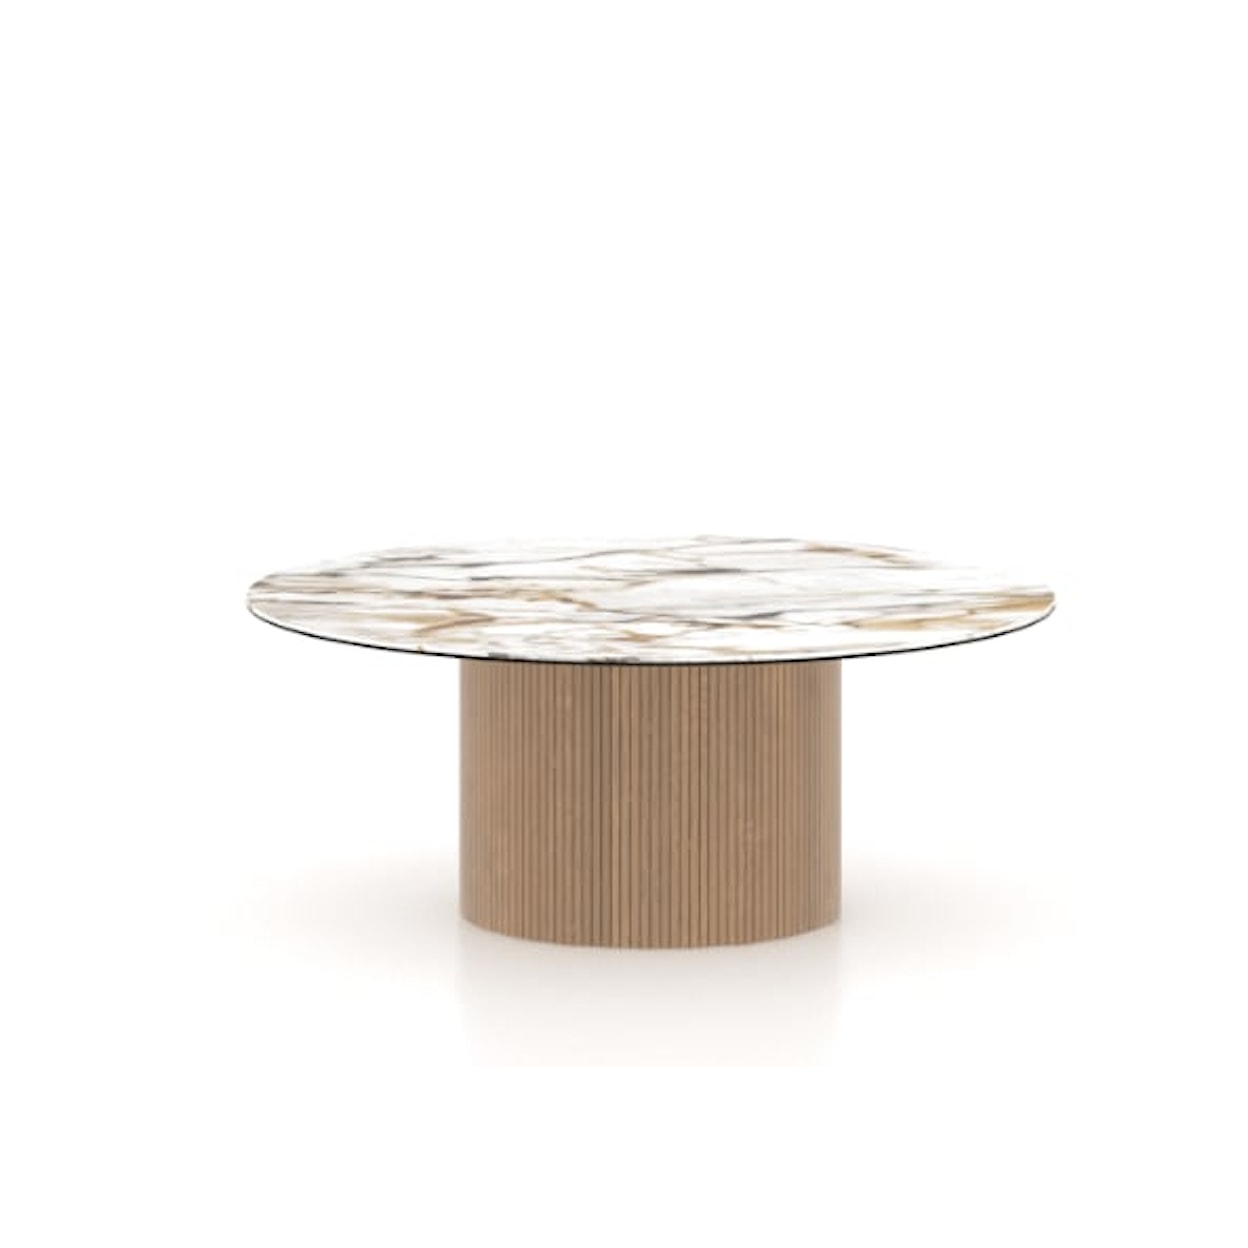 Canadel Canadel Living ROUND SHELL TOP ILLUSION COFFEE TABLE